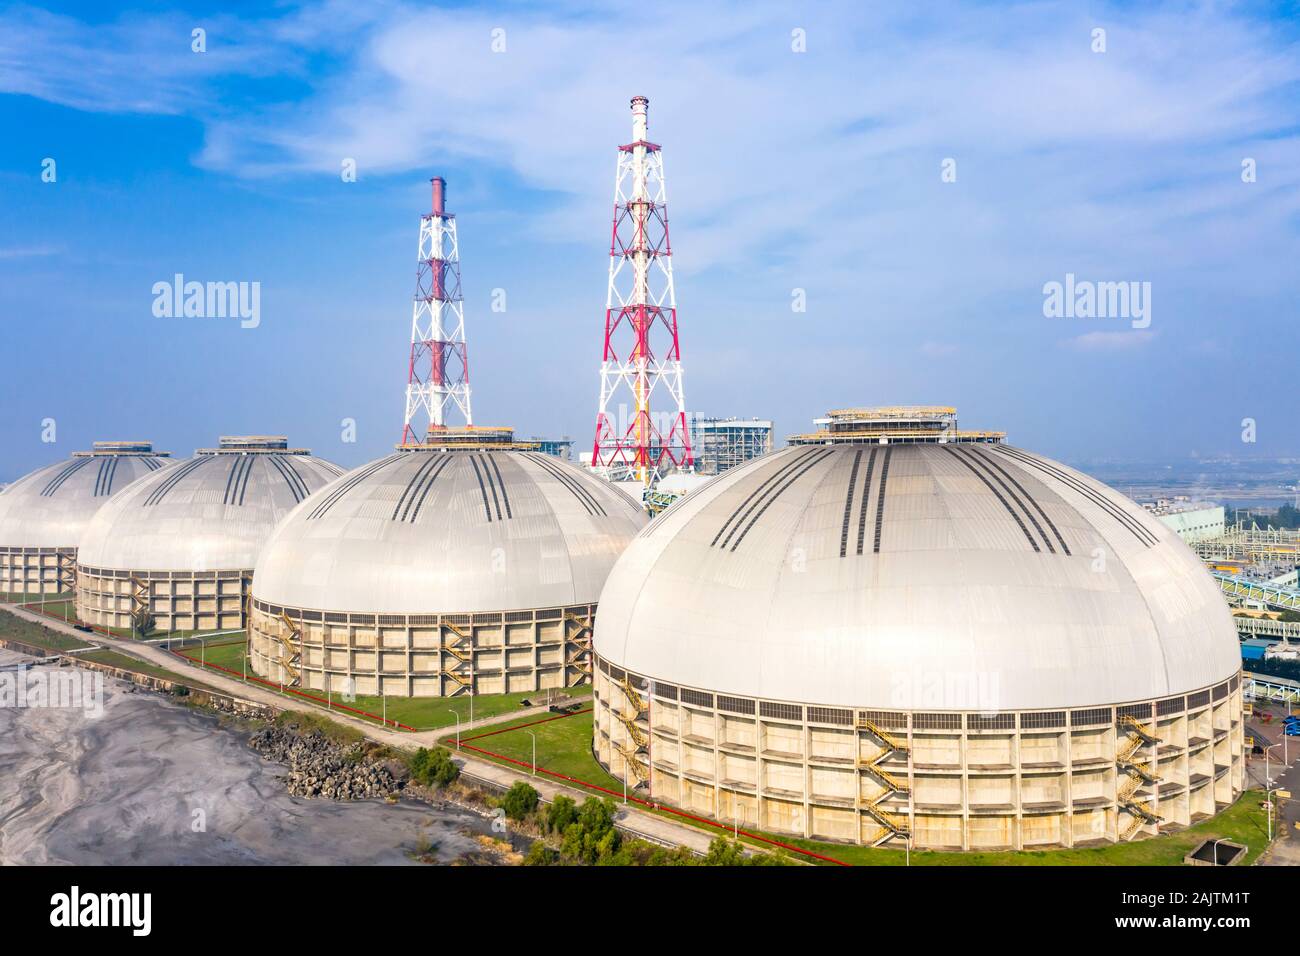 Hsinta  Thermal power plant  ,  January  04, 2020. - Aerial view  Hsinta  Thermal power plant in kaohsiung . Taiwan. Stock Photo